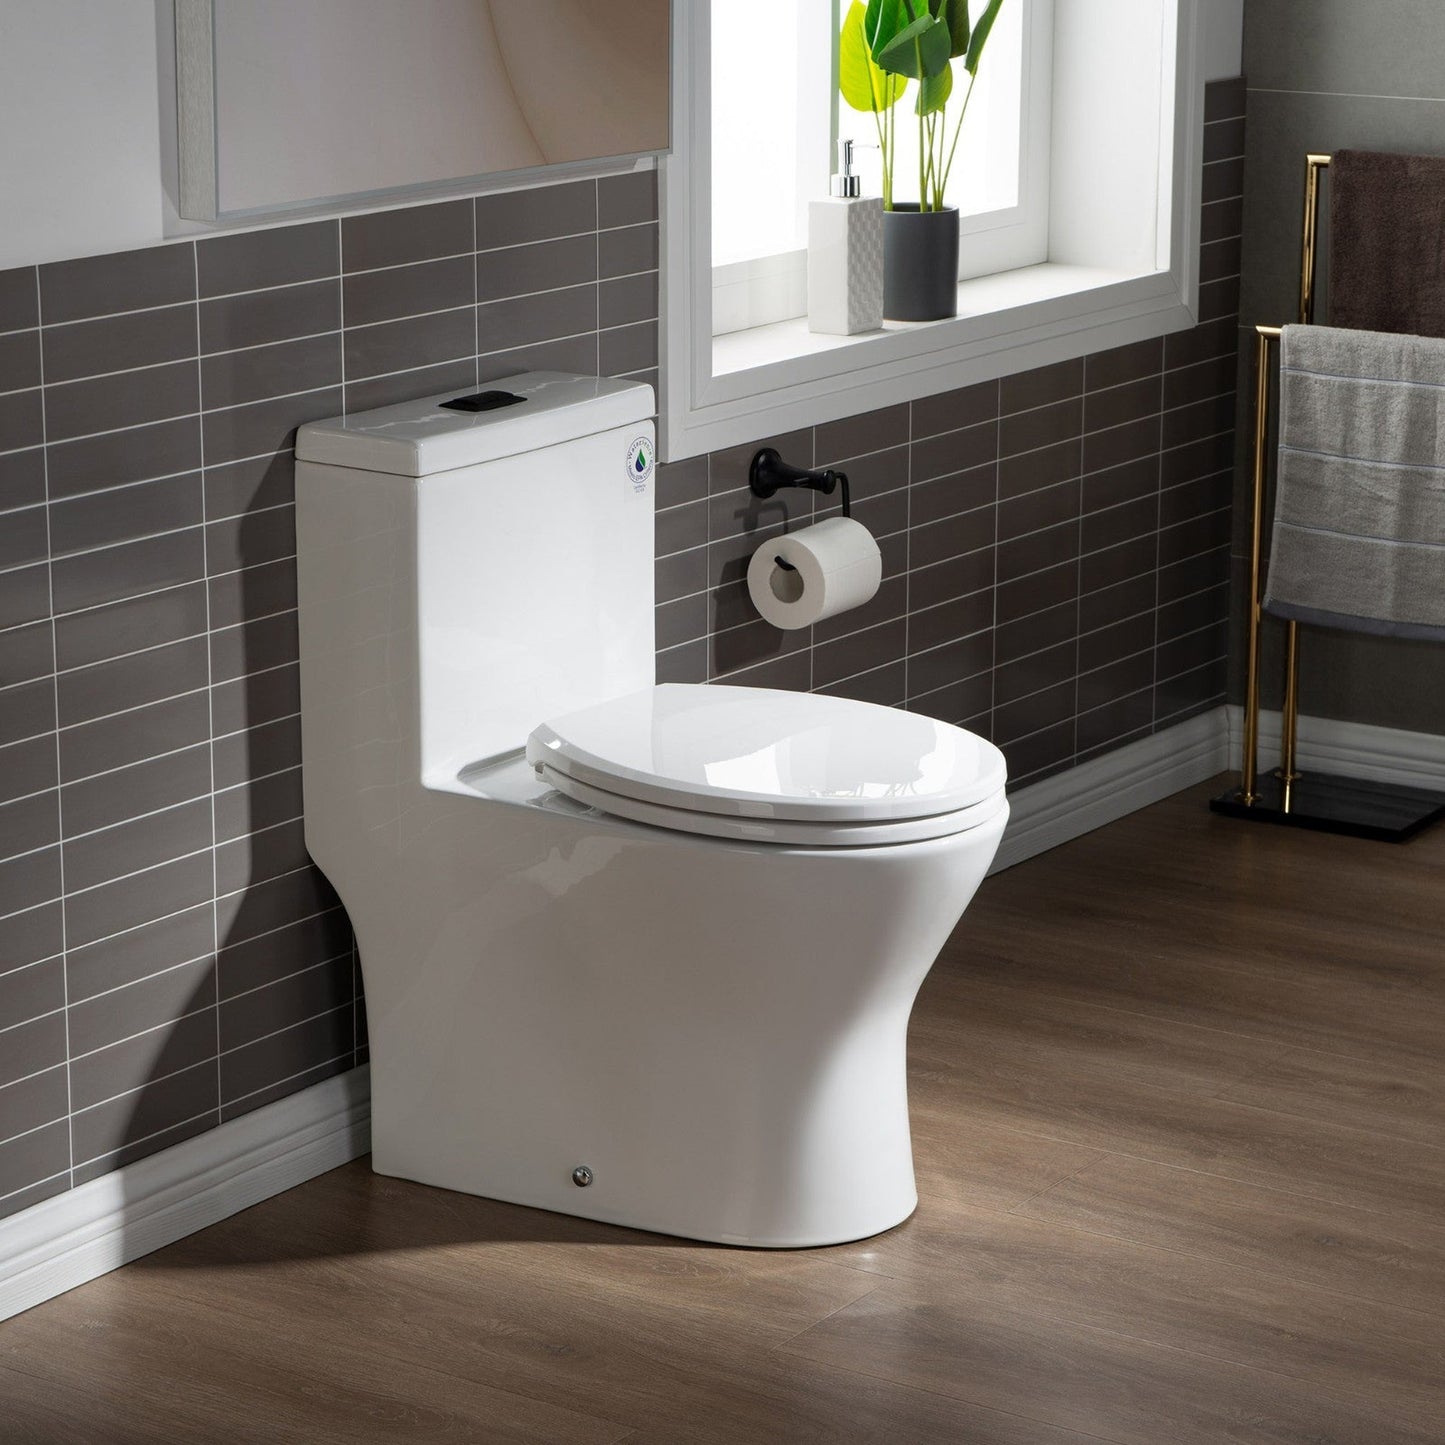 WoodBridge T0031-MB White Short Compact Tiny One Piece Toilet With Soft Closing Seat and Matte Black Finish Button